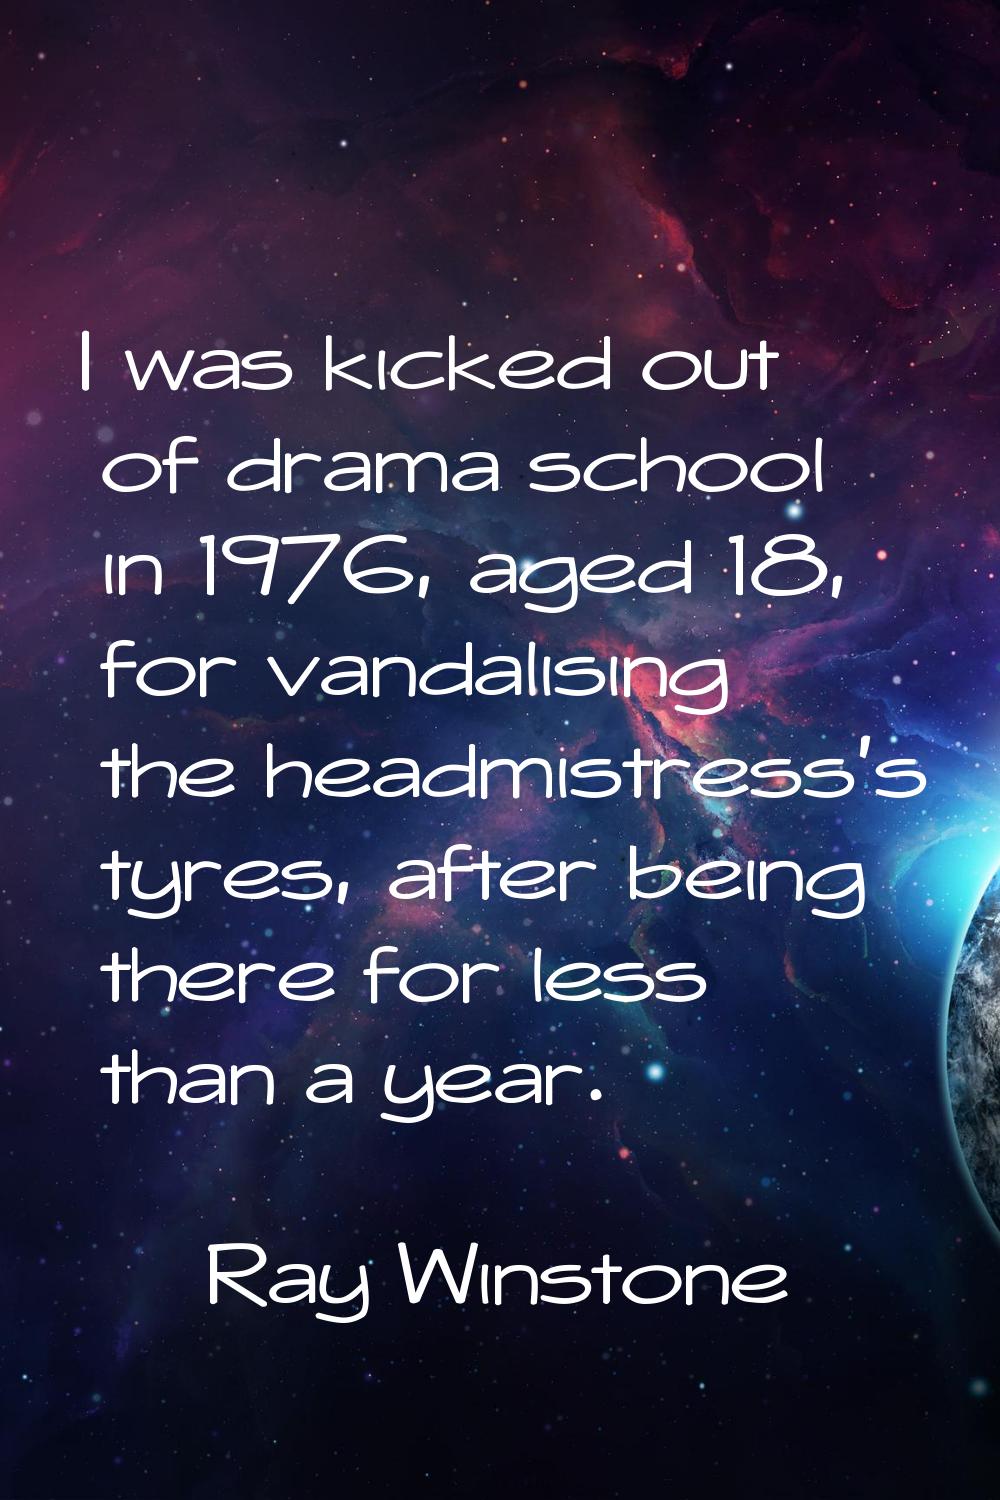 I was kicked out of drama school in 1976, aged 18, for vandalising the headmistress's tyres, after 